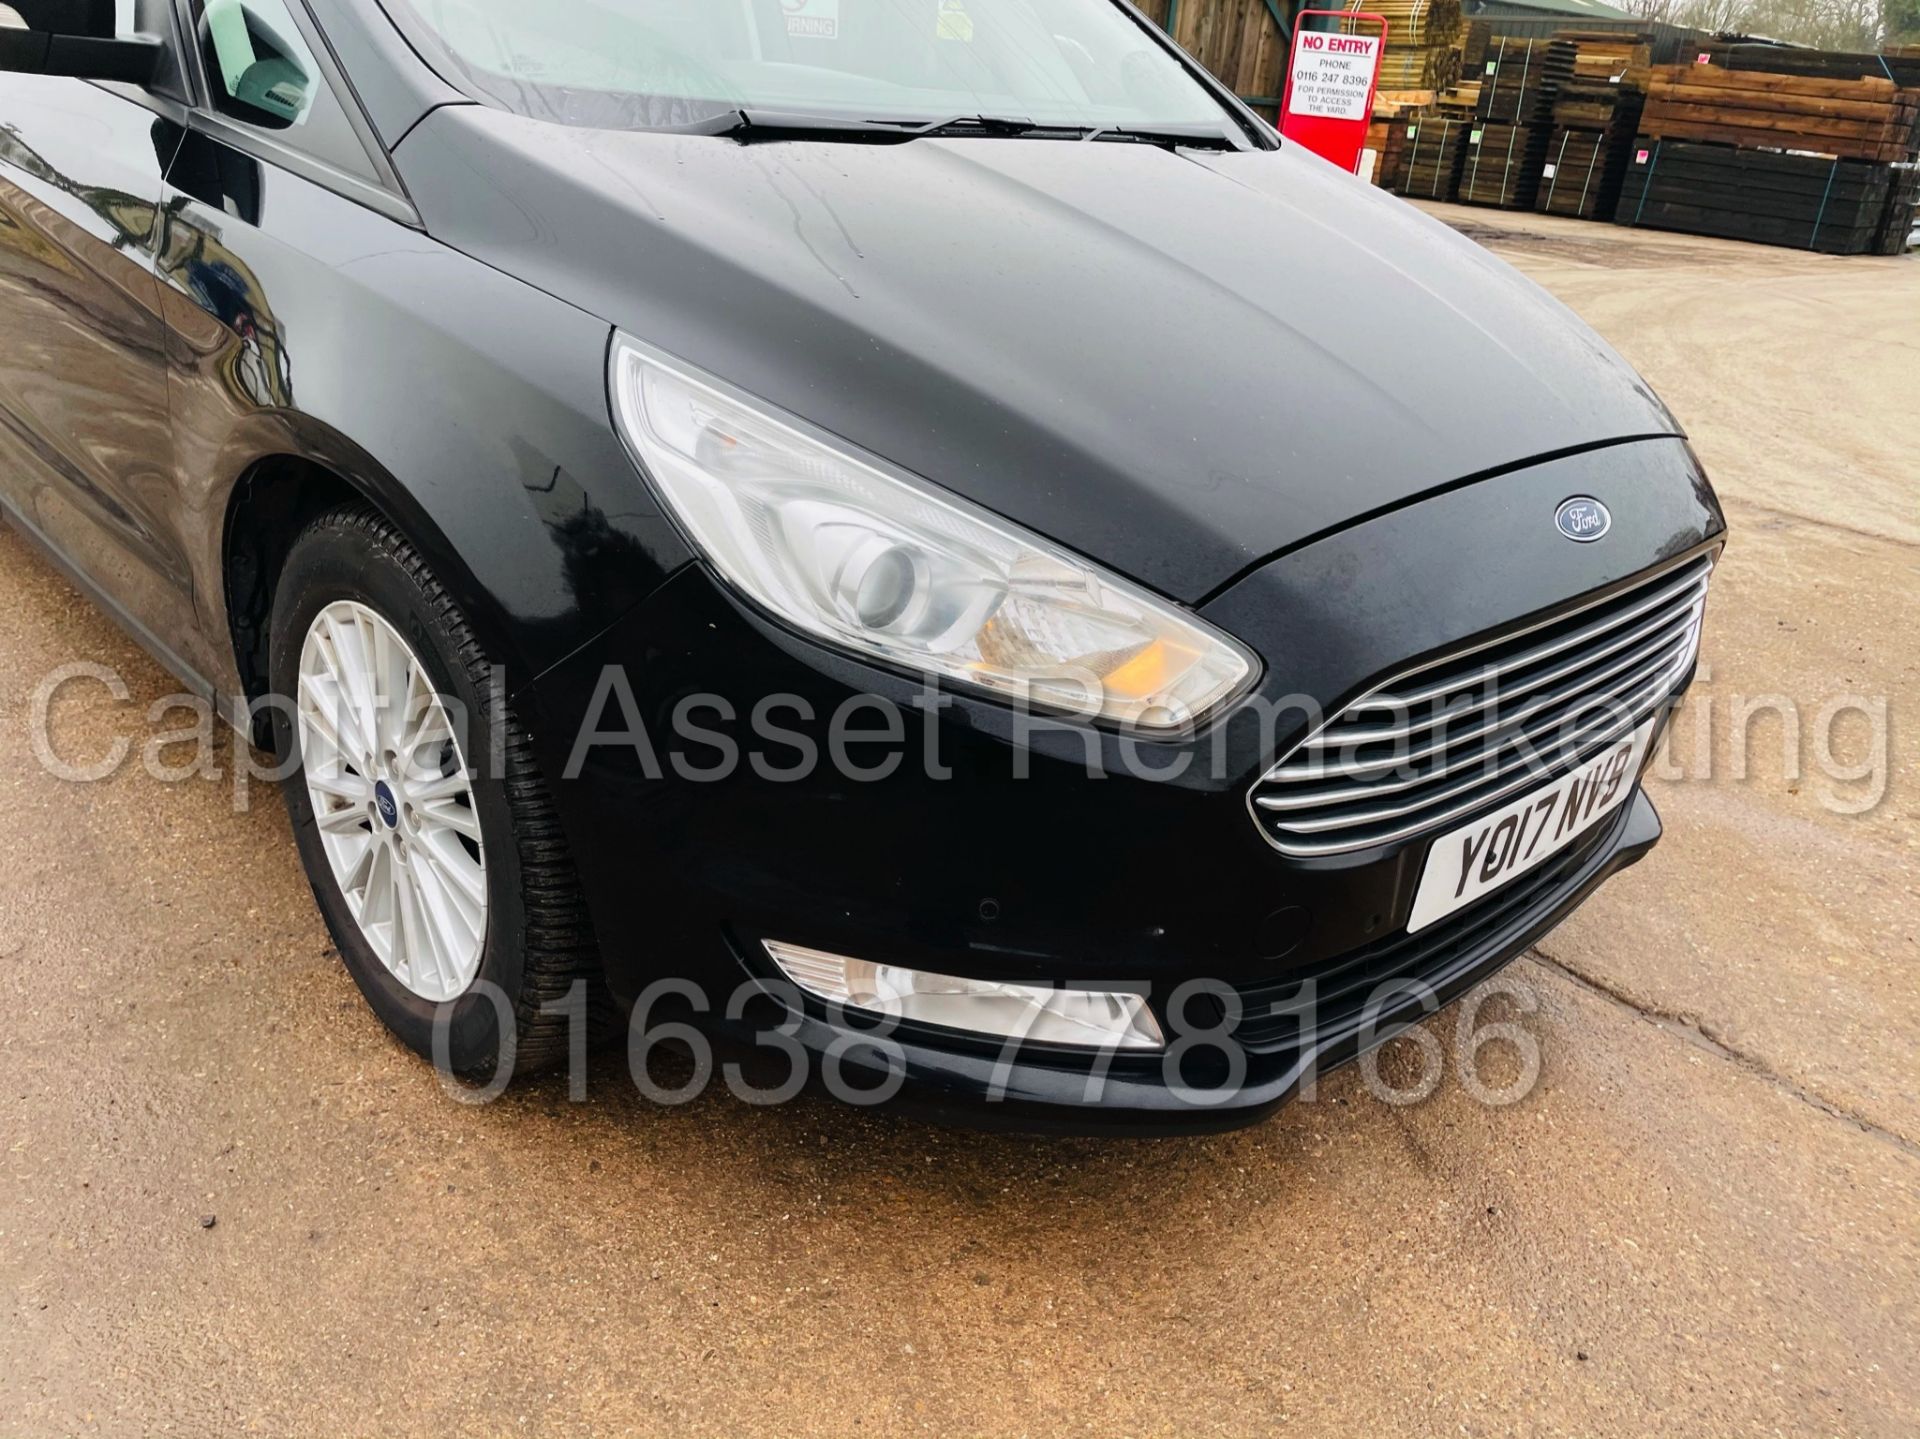 (ON SALE) FORD GALAXY *ZETEC EDITION* 7 SEATER MPV (2017 - EURO 6) '2.0 TDCI - AUTO' (1 OWNER) - Image 16 of 48